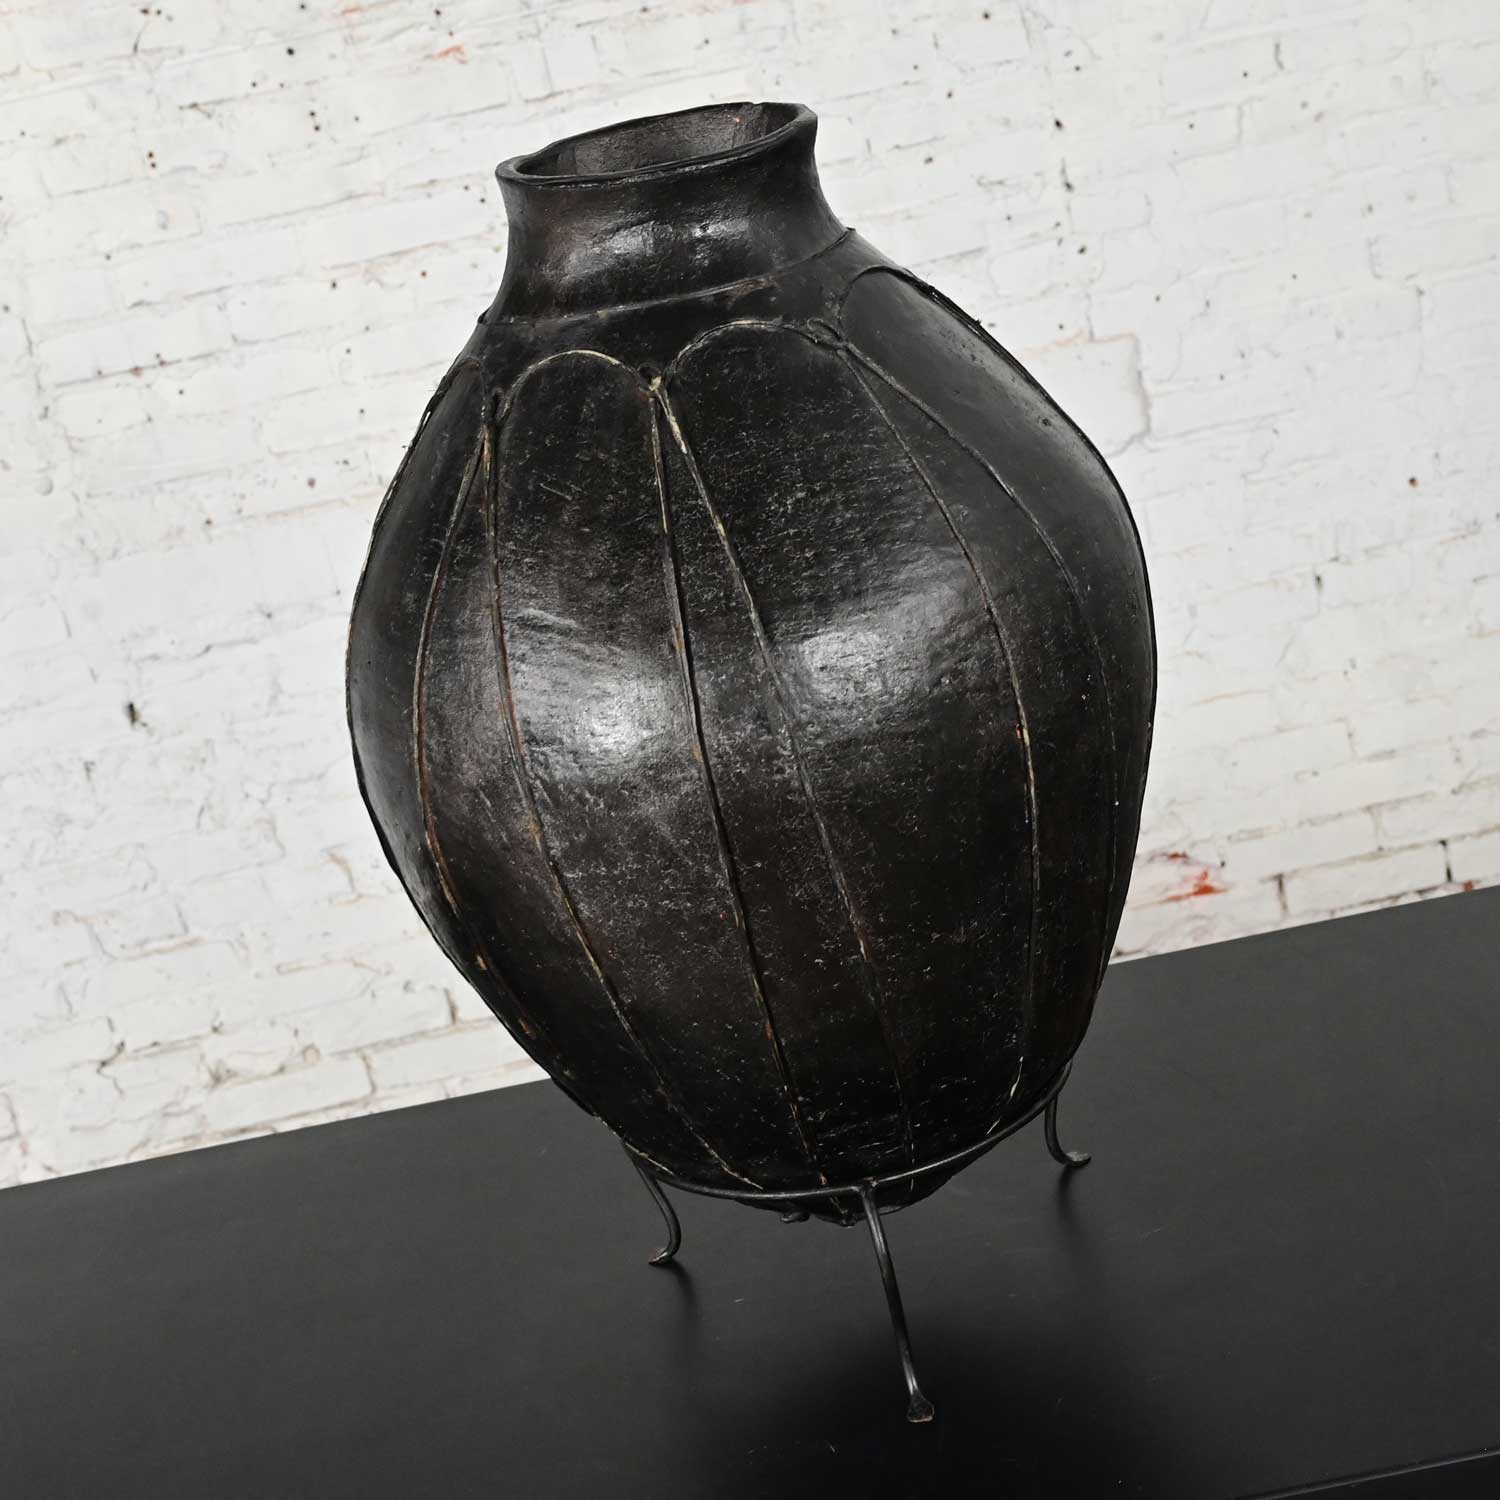 20th Century Tribal Large Scale Clay Fermenting Pot or Water Jug Black w/ Goatskin Leather Straps on Stand